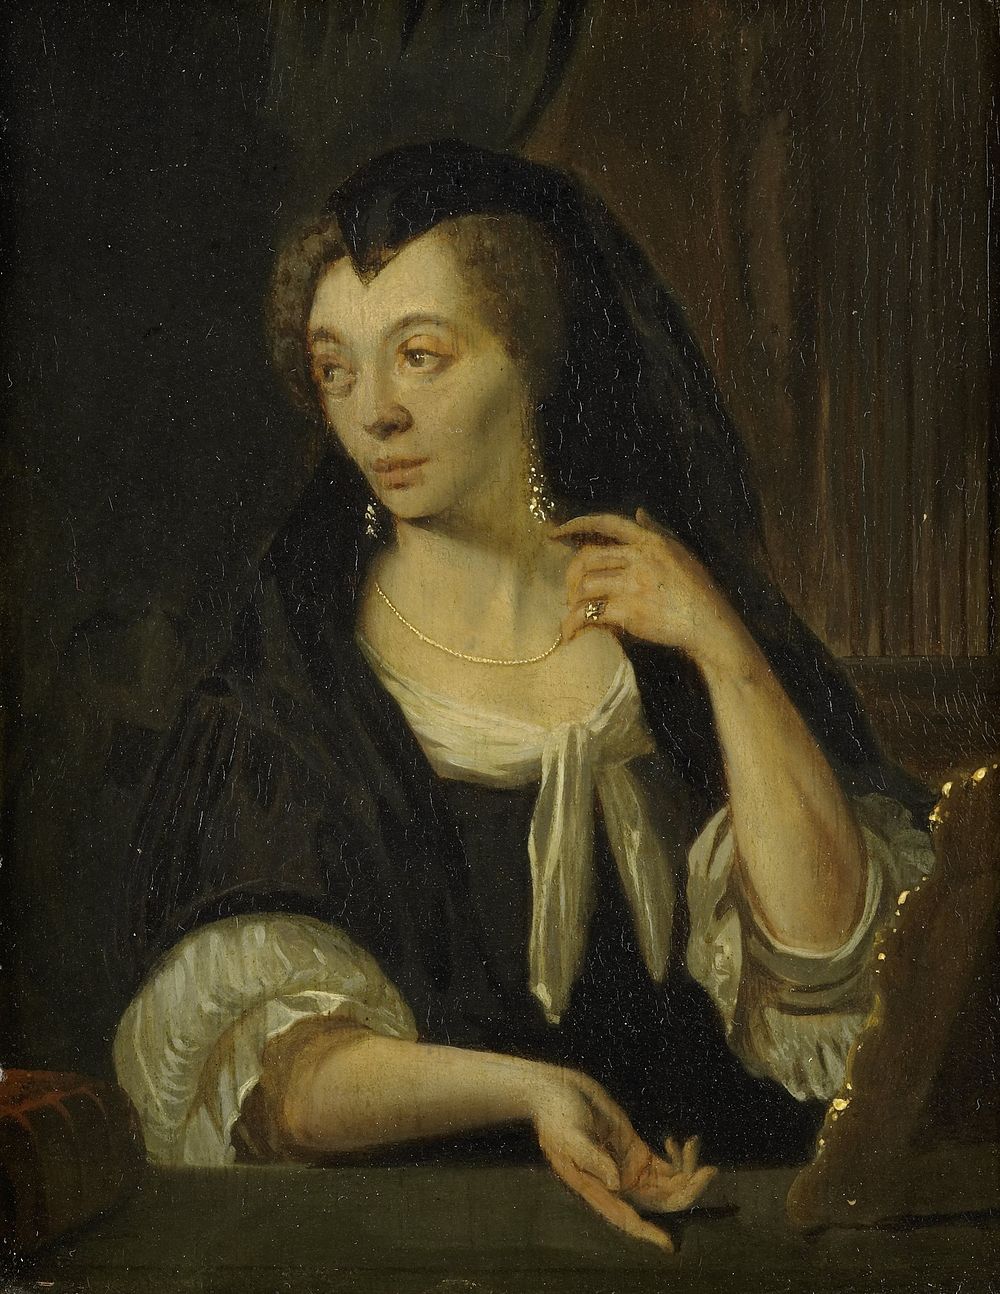 Anna de Hooghe (1645-1717). The Painter's fourth Wife (1690 - 1708) by Ludolf Bakhuysen